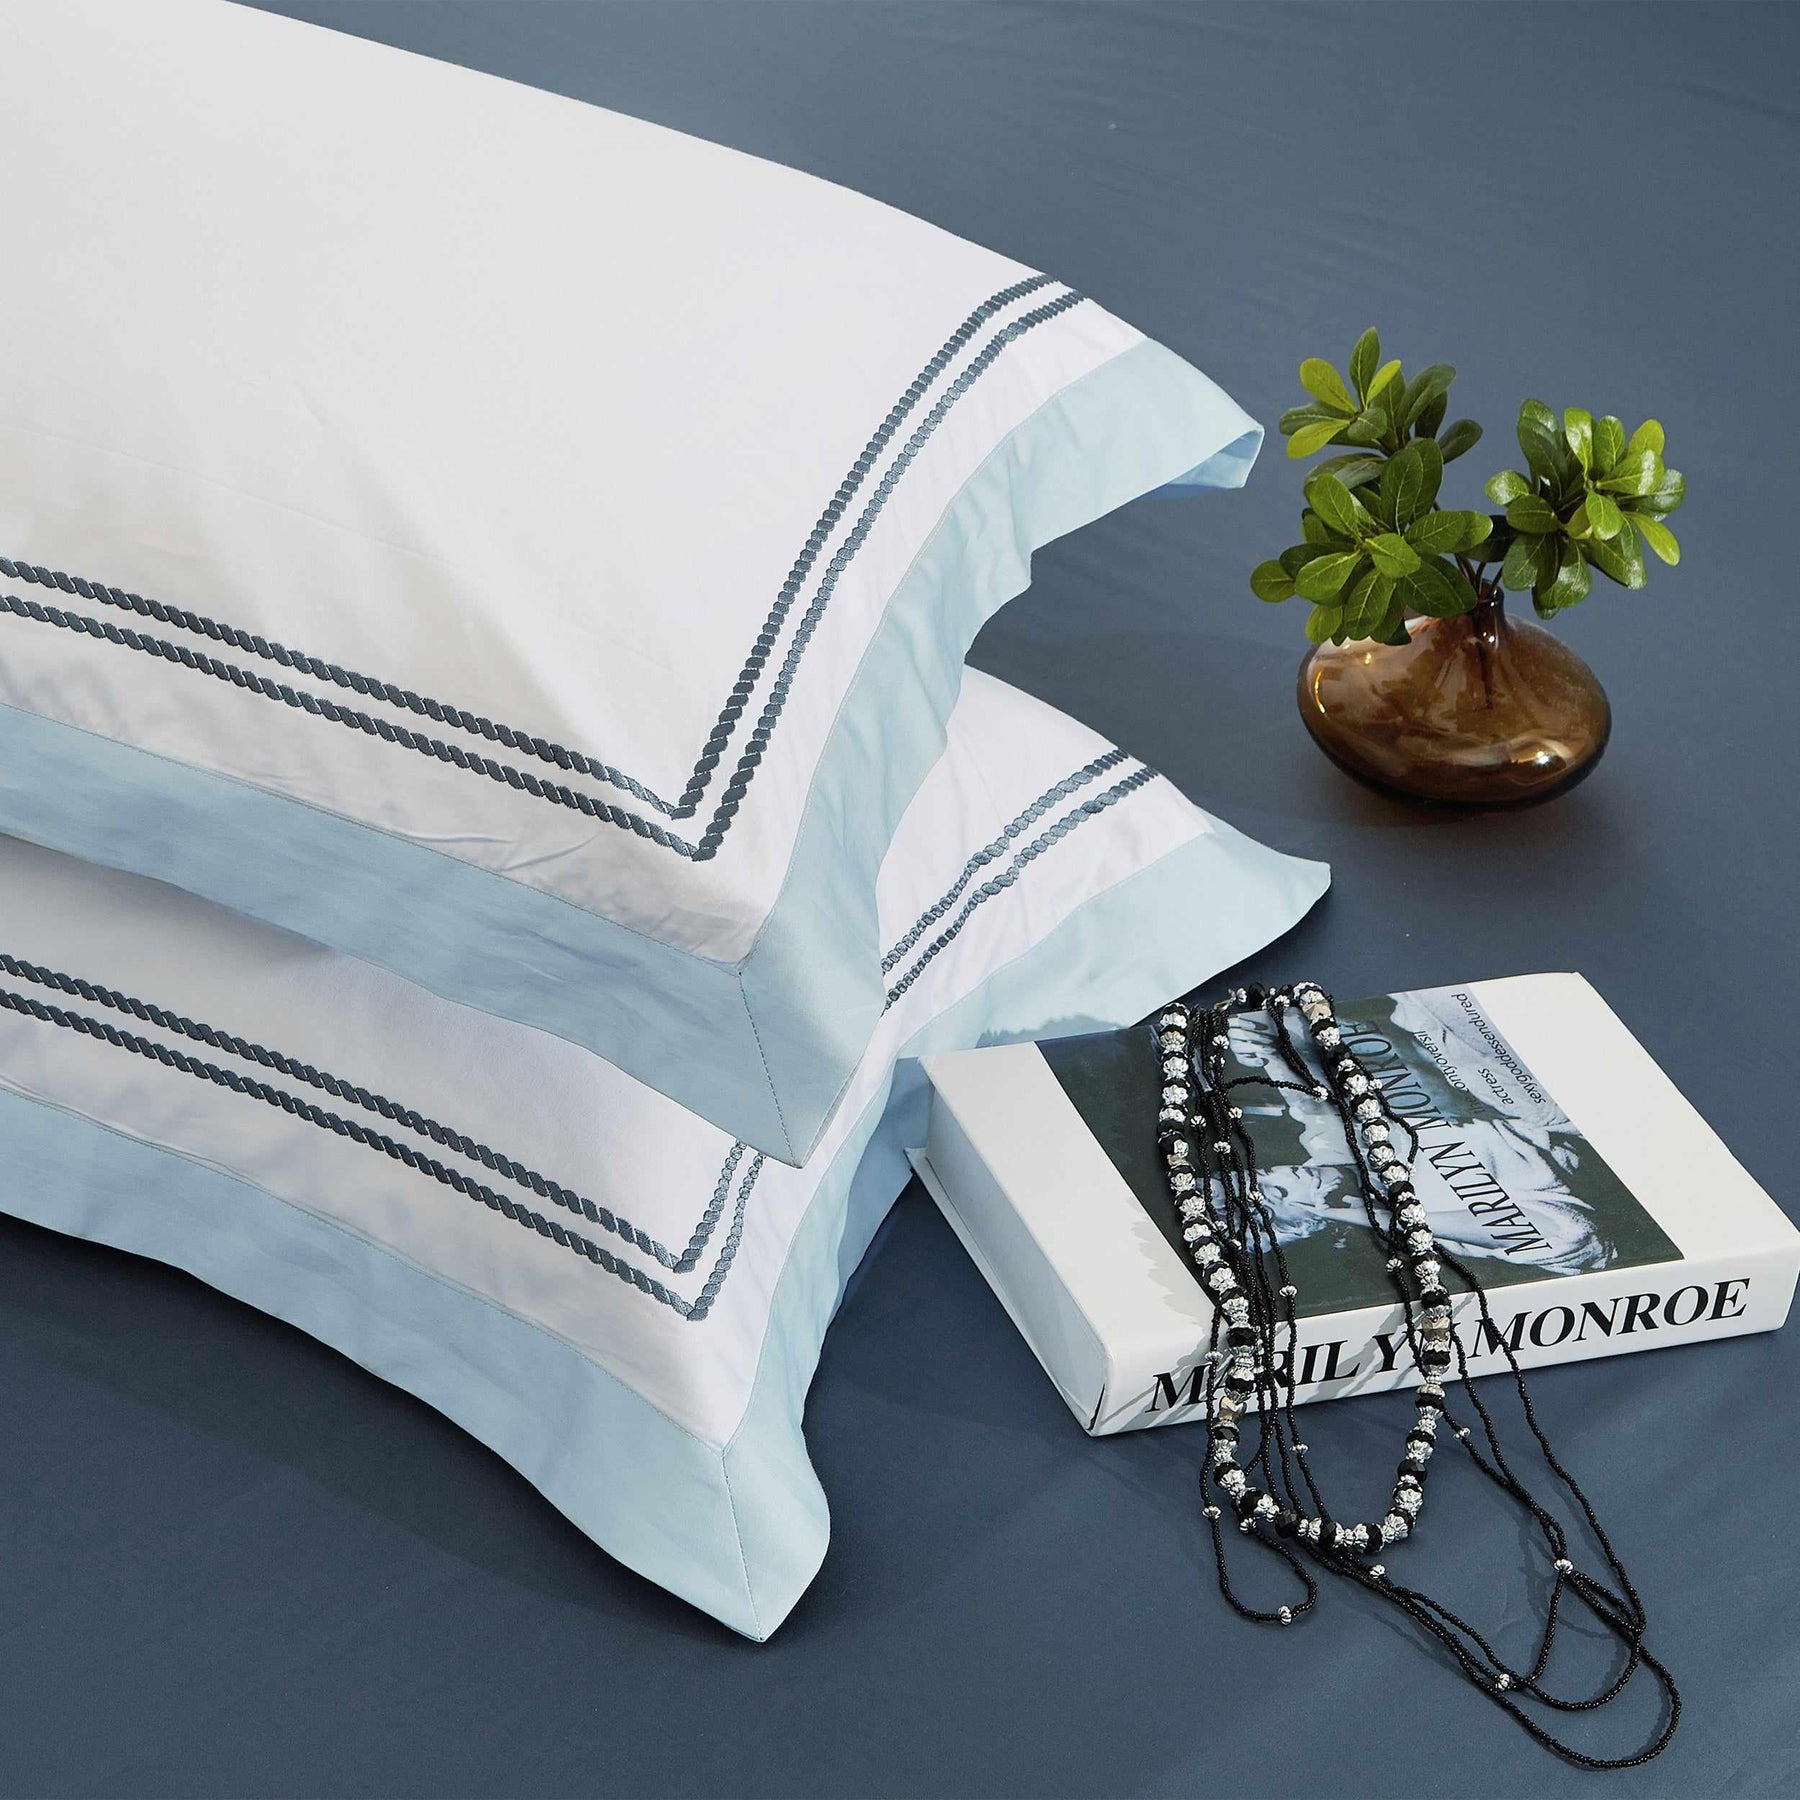 Superior Meridian 300-Thread Count Cotton Embroidered Duvet Cover and Sham Set - Meridian